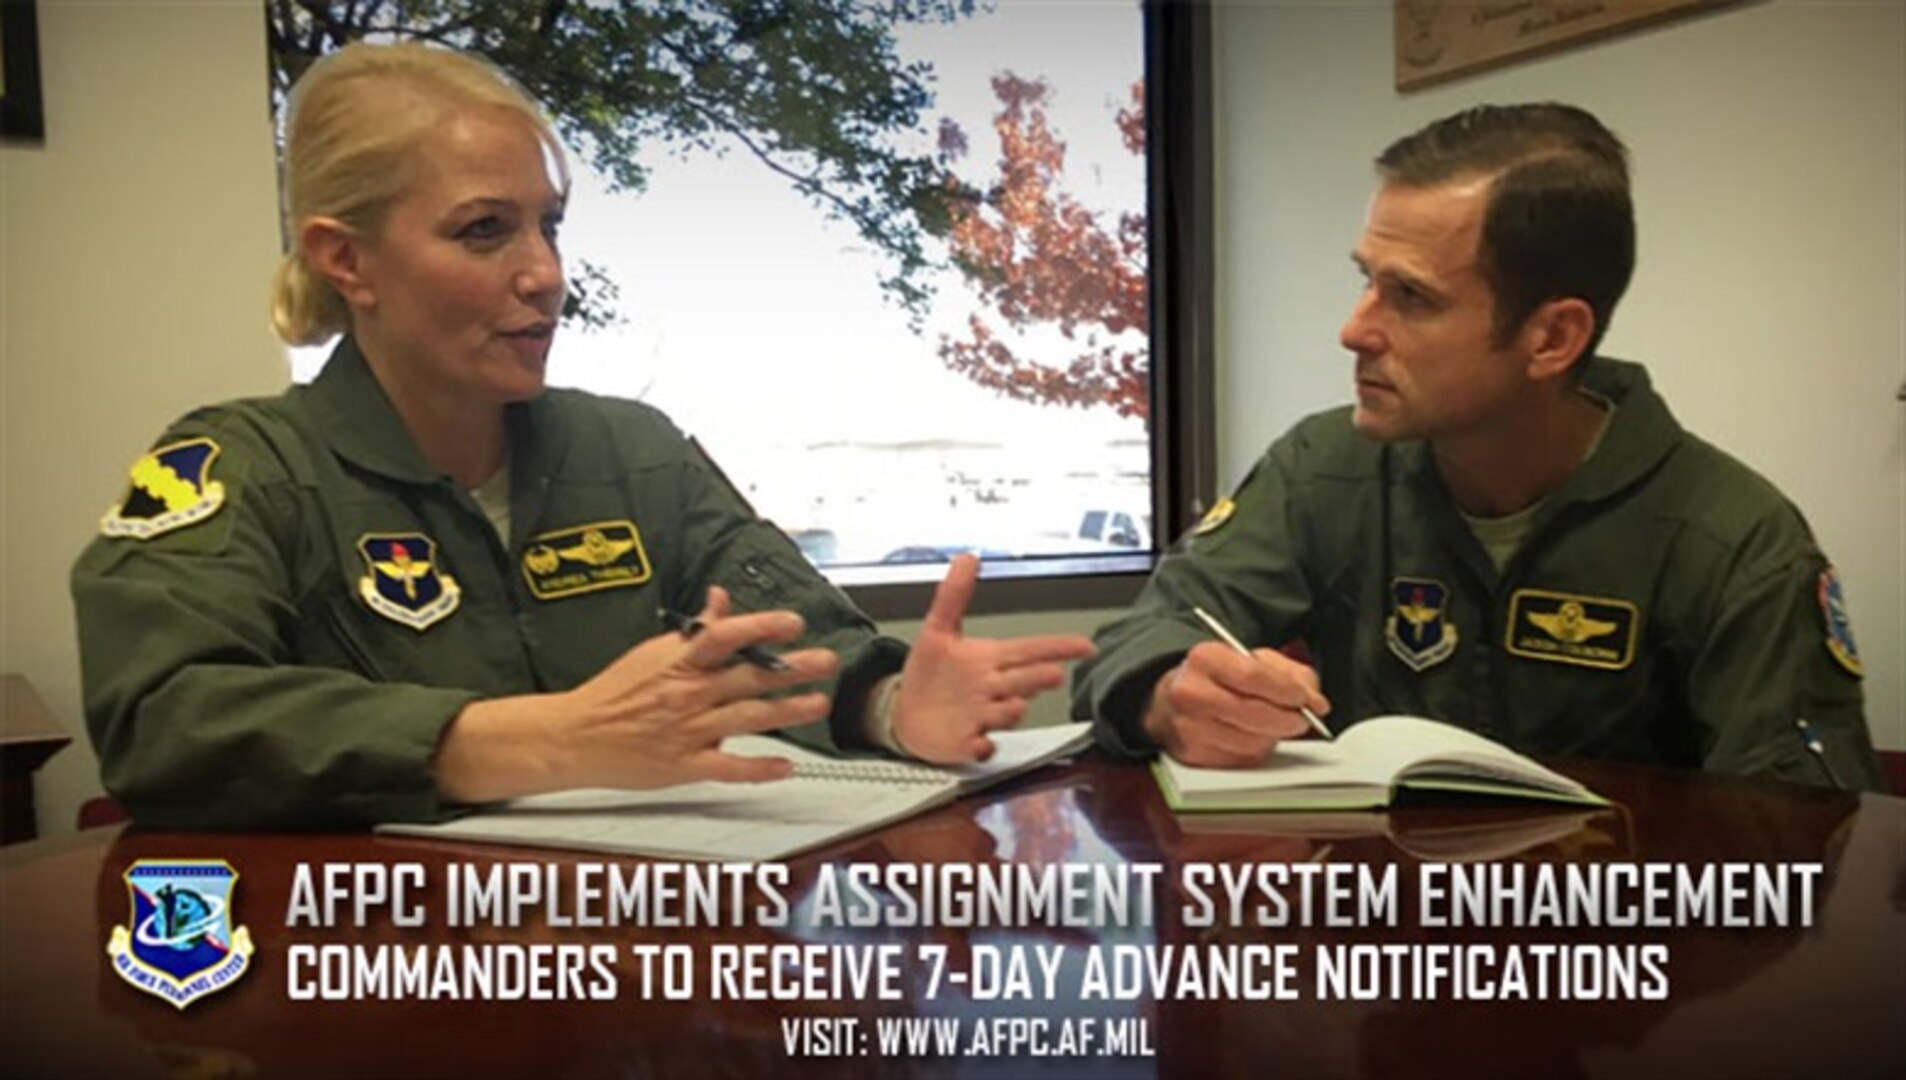 Col. Andrea Themely (left), 80th Flying Training Wing commander, talks to Lt. Col. Jason Colborn Dec. 20, 2017, about the opportunity he will have as the first detachment commander of a new unit called Pilot Training Next. The initiative, led by Air Education and Training Command Commander Lt. Gen. Steven Kwast, will rely on different technologies to make a more efficient pathway for the Air Force to train and create pilots. Colborn was hand-picked for the position and will take leadership of the Austin, Texas-based detachment.